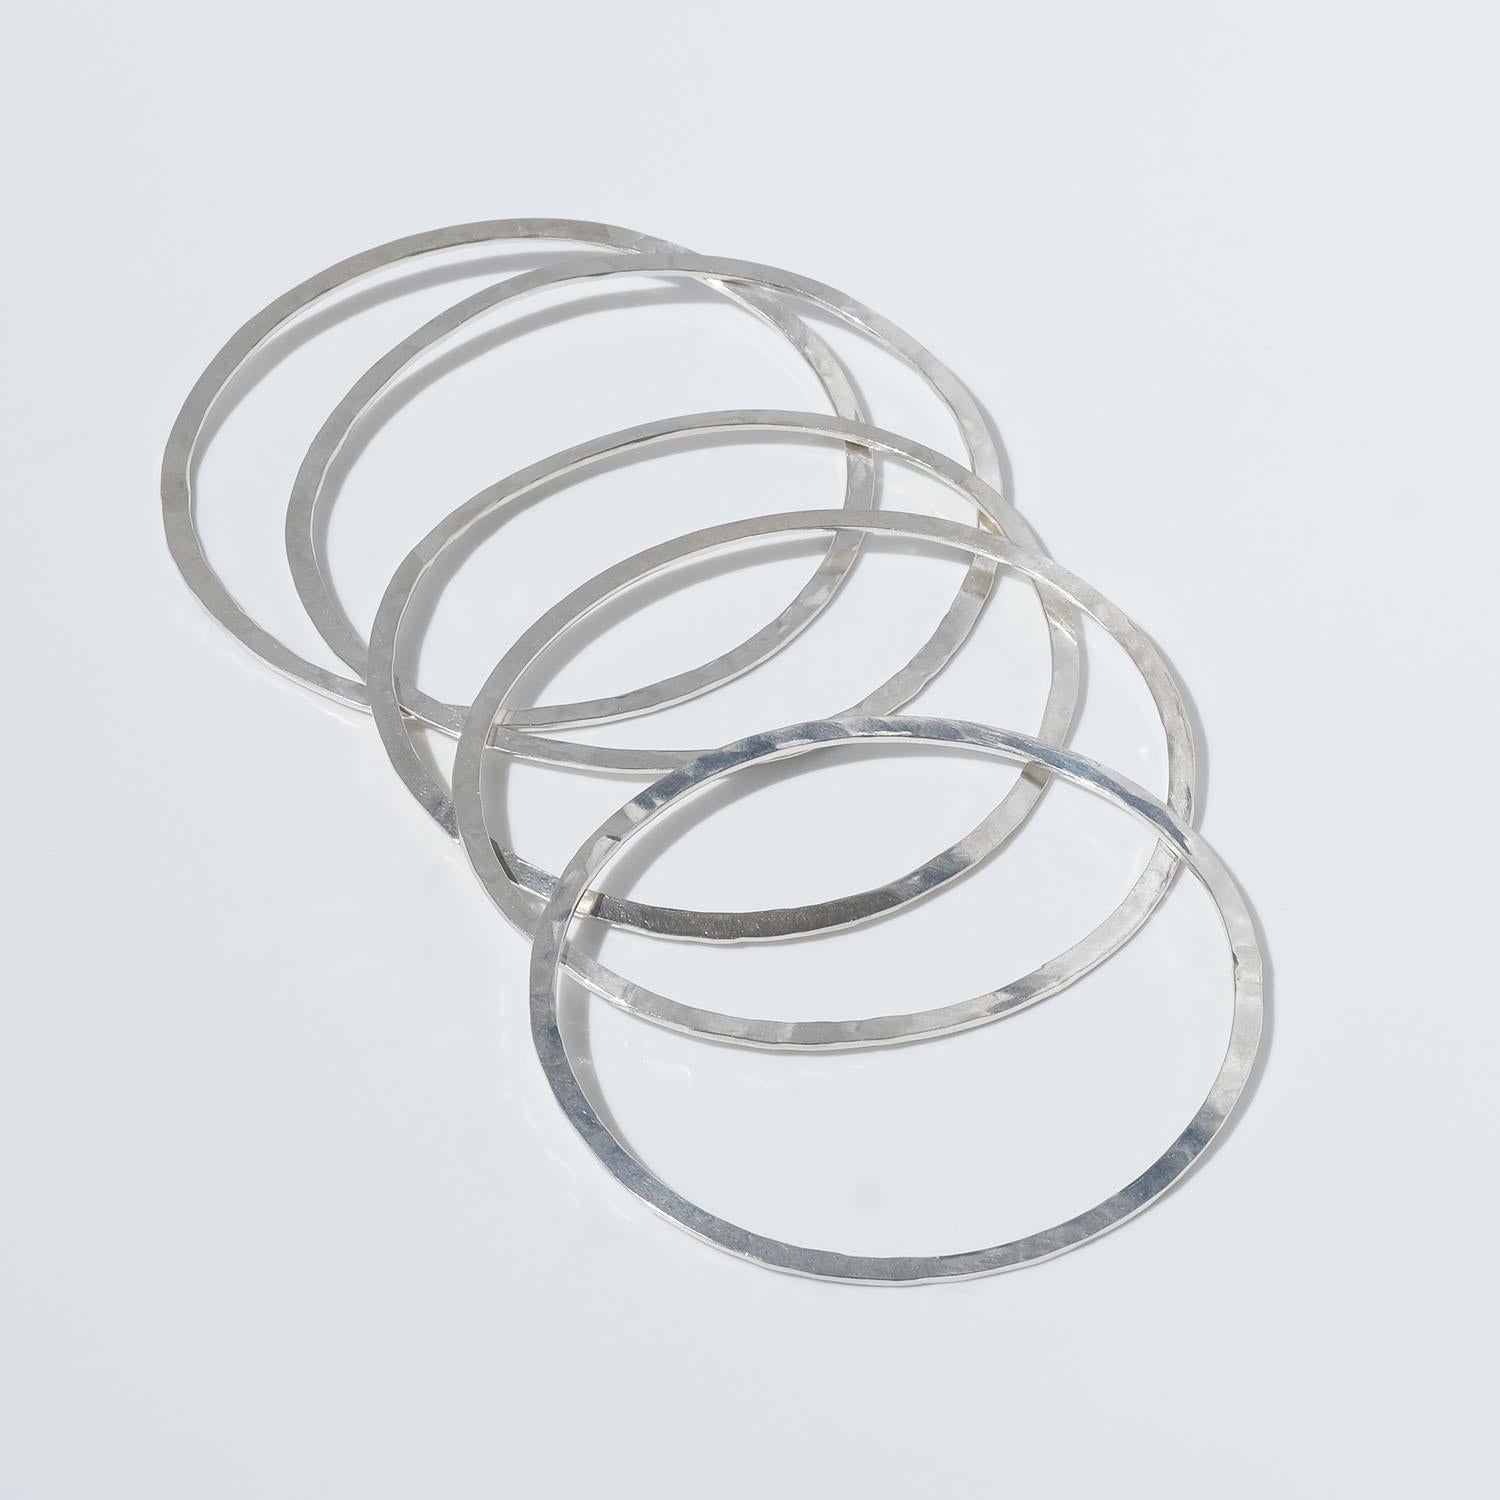 These five sterling silver bangles have a matt and partly hammered surface. They may be described as simple, smart and fashionable and they can be worn at the office, in school or for parties.

Do you know that Rey Urban opened his shop in